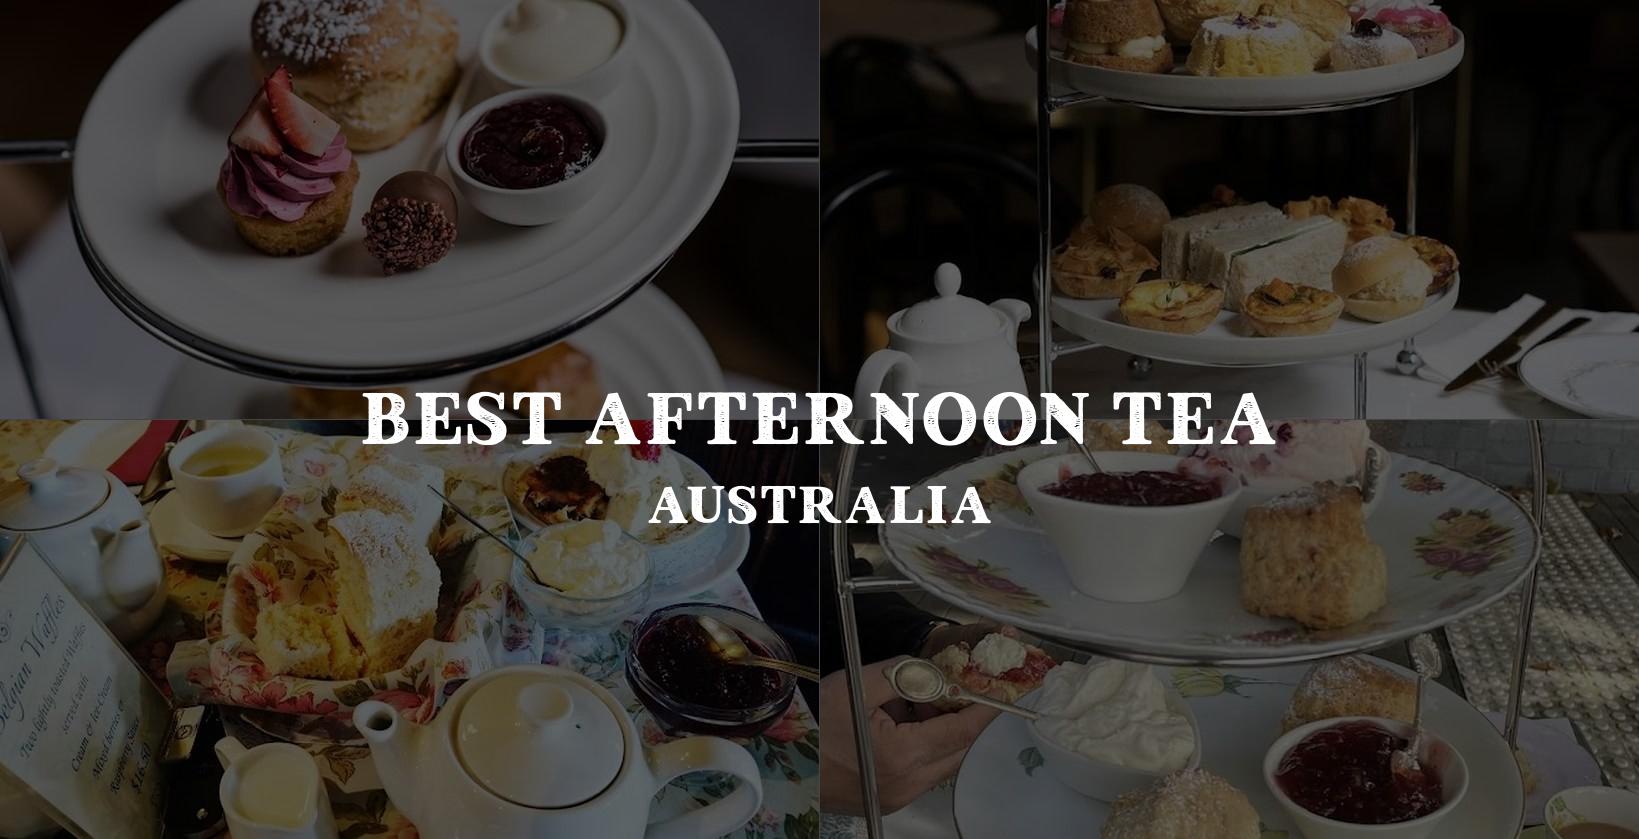 Choosing the perfect spot for afternoon tea in Australia